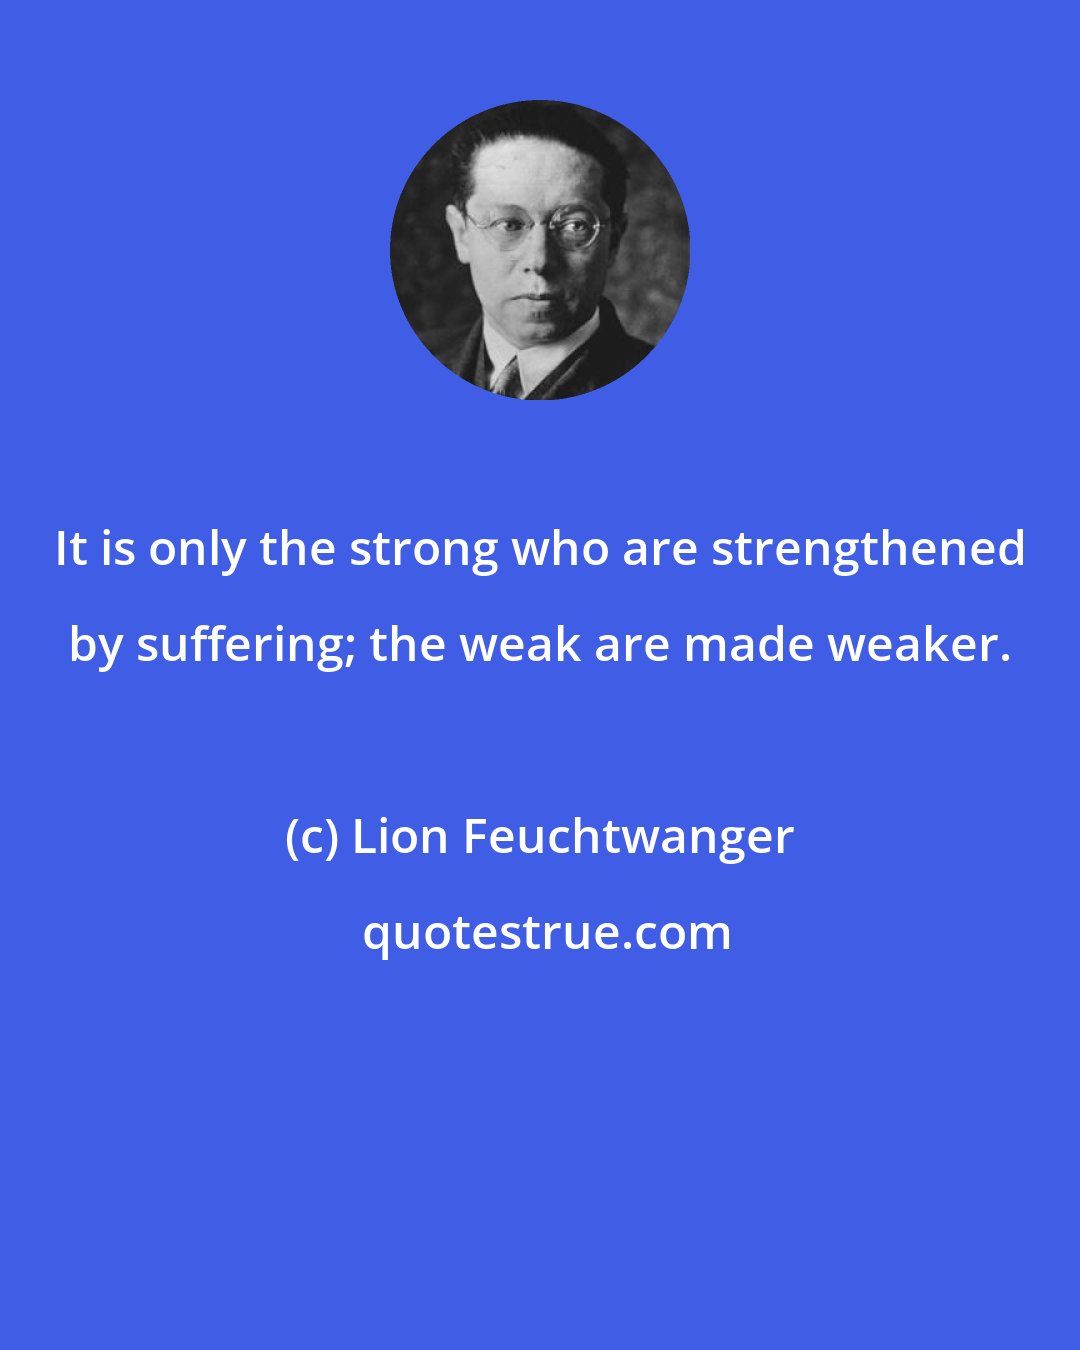 Lion Feuchtwanger: It is only the strong who are strengthened by suffering; the weak are made weaker.